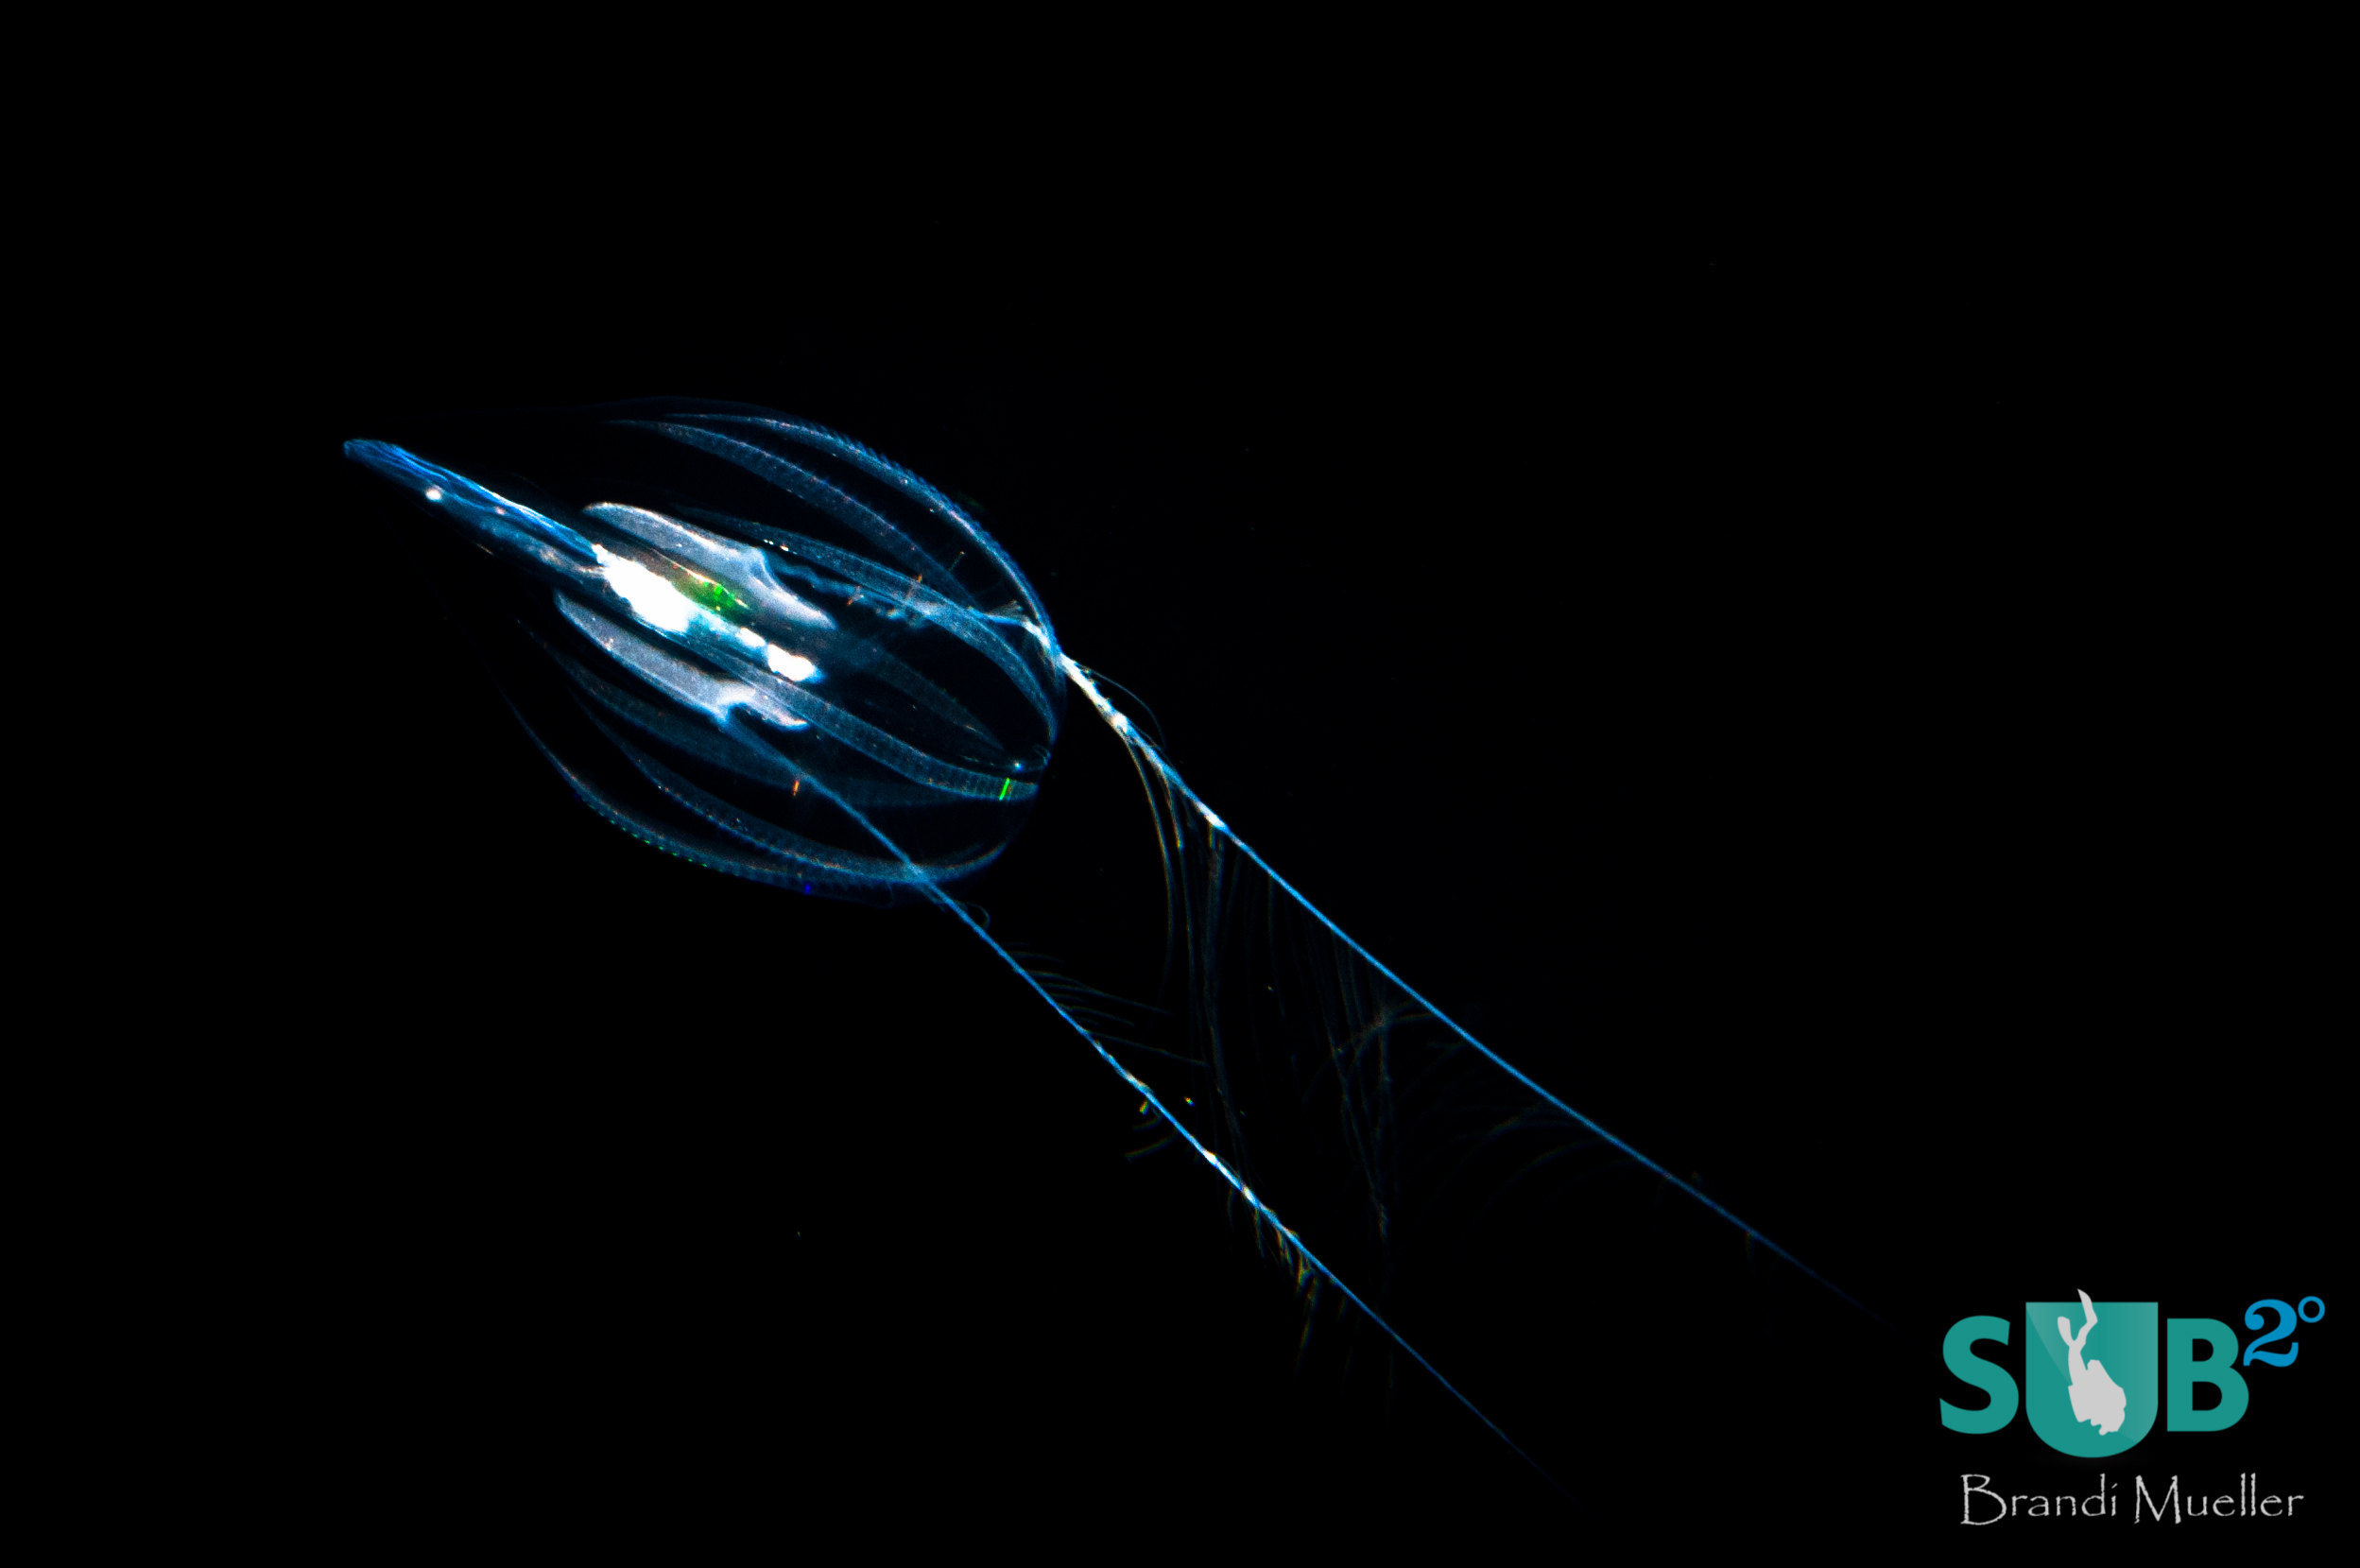 A Ctenophore, also called comb jelly, on the Pelagic Magic night dive.